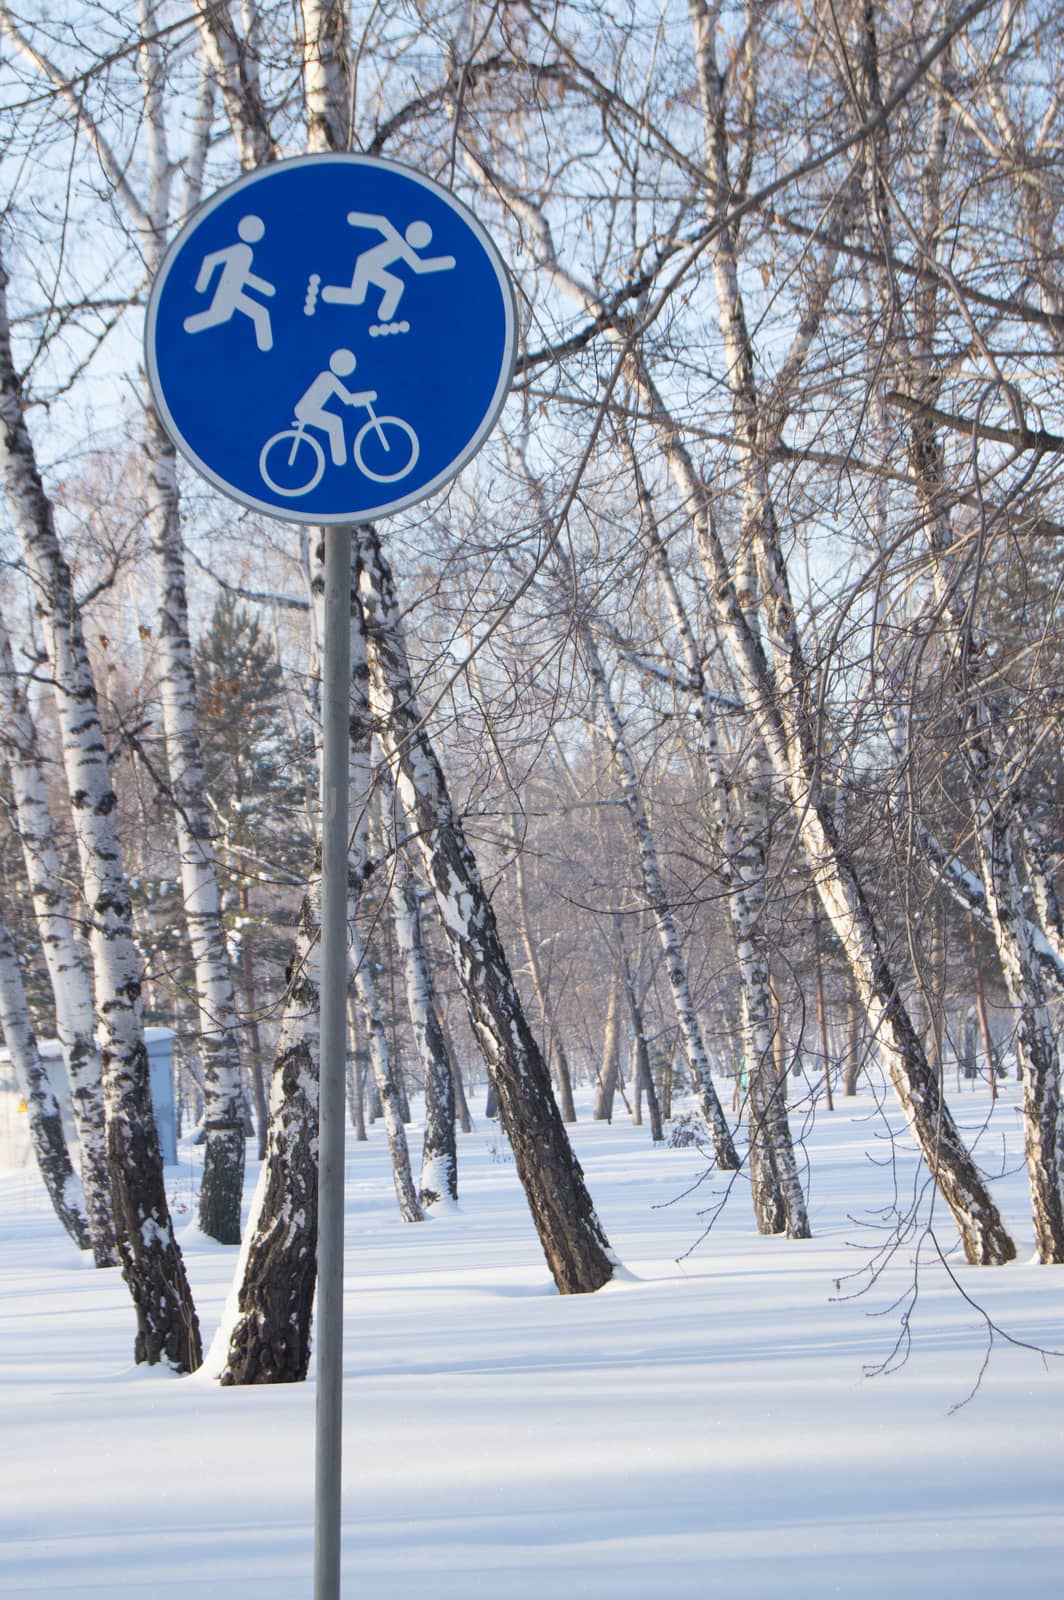 Concept sports activities in the winter. Sign of the Bicycle, skating and Jogging by claire_lucia